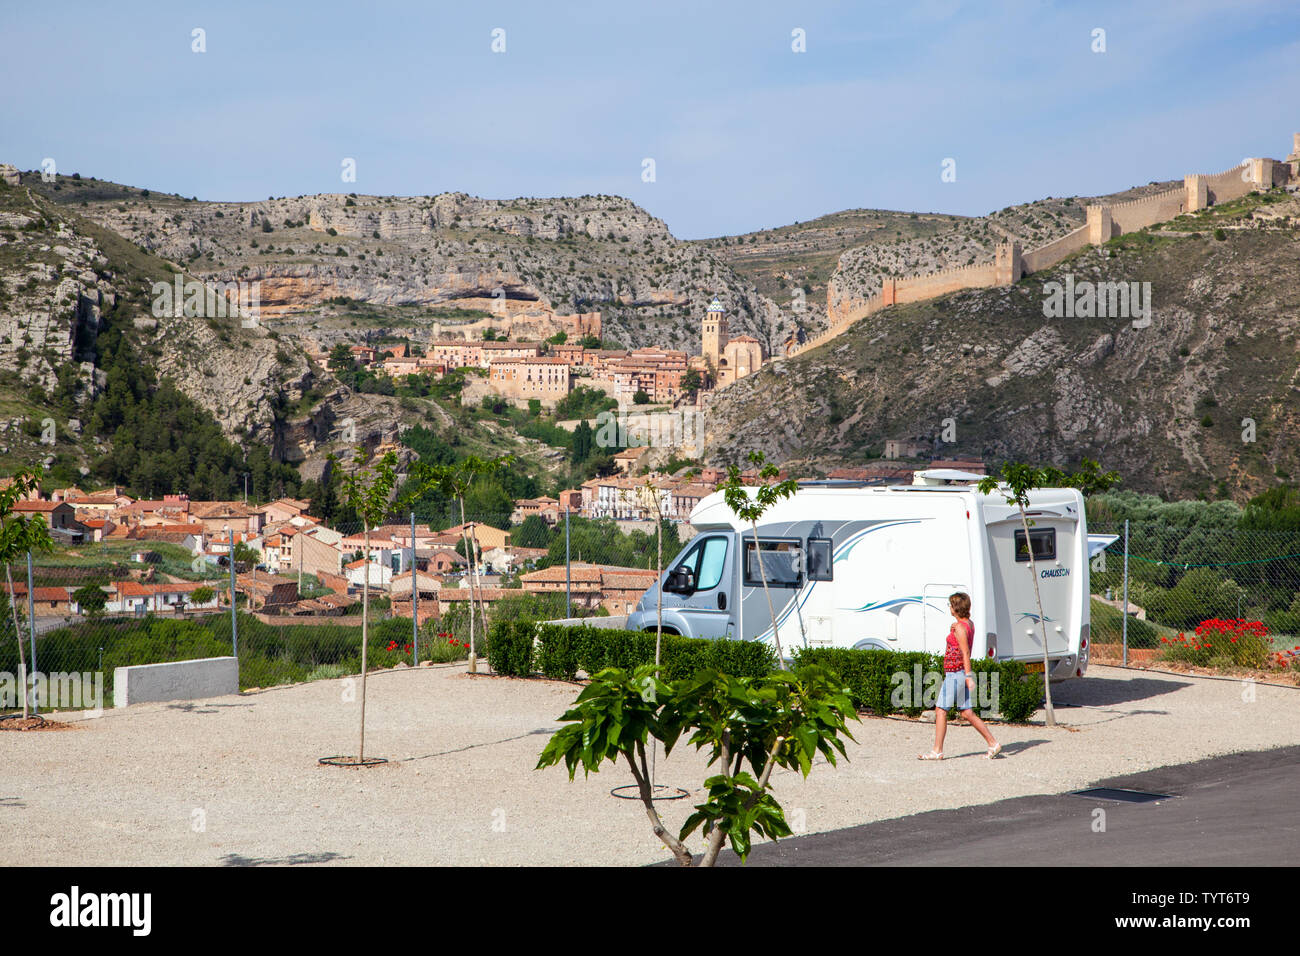 View of the medieval city walls of the Spanish Moorish town of Albarracin  from the Camping and caravan site of Ciudad De Albarracín Spain Stock Photo  - Alamy